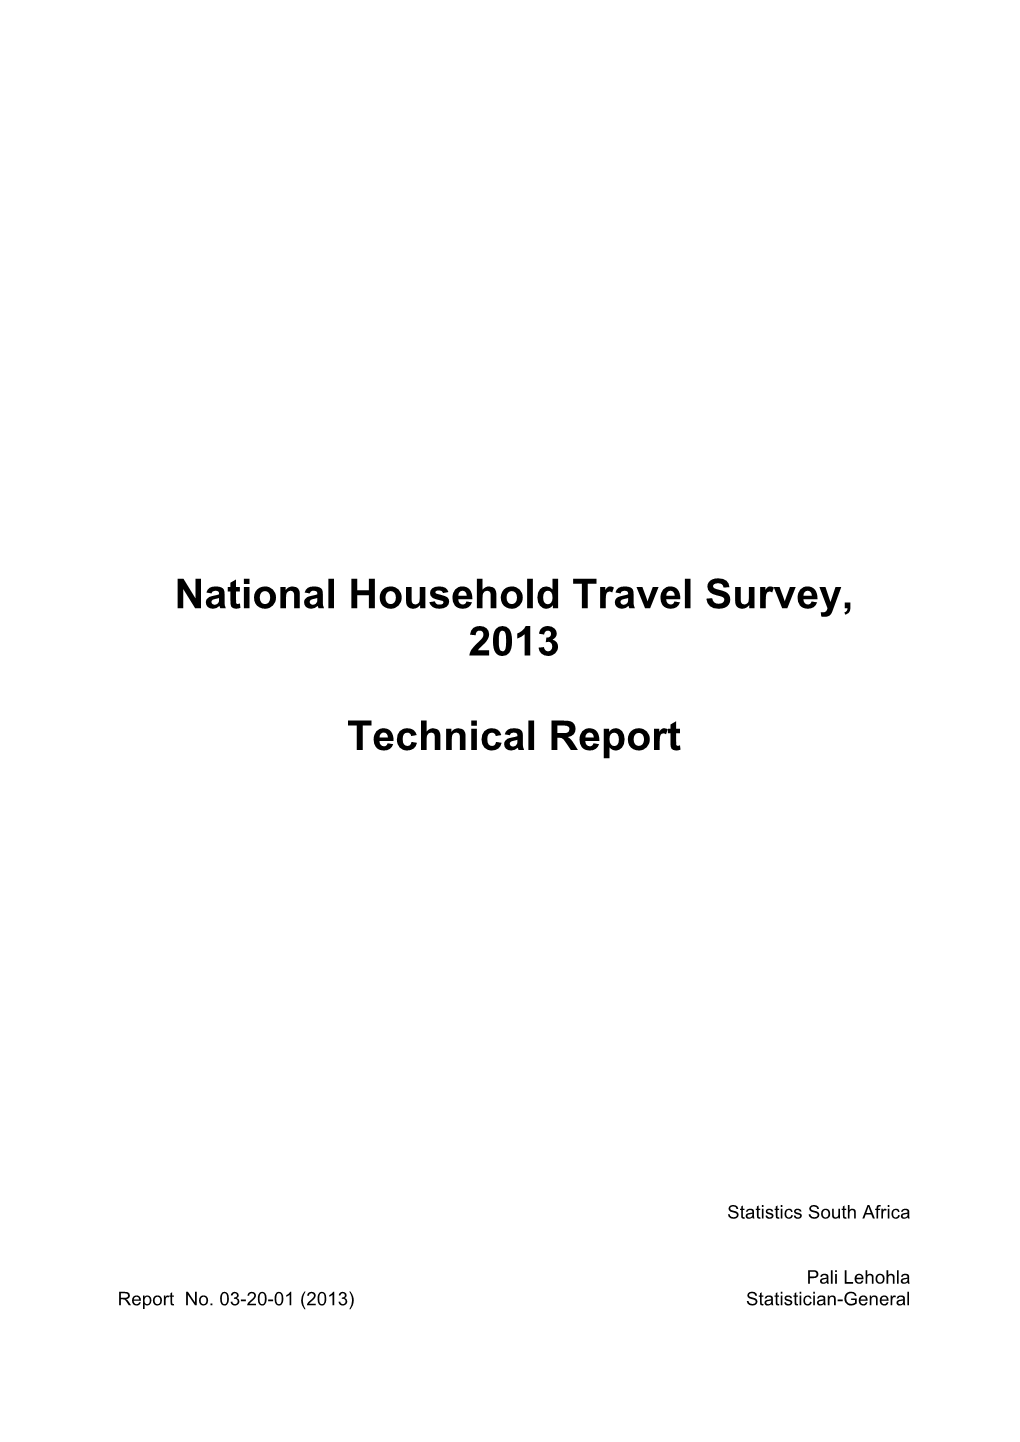 National Household Travel Survey, 2013 Technical Report